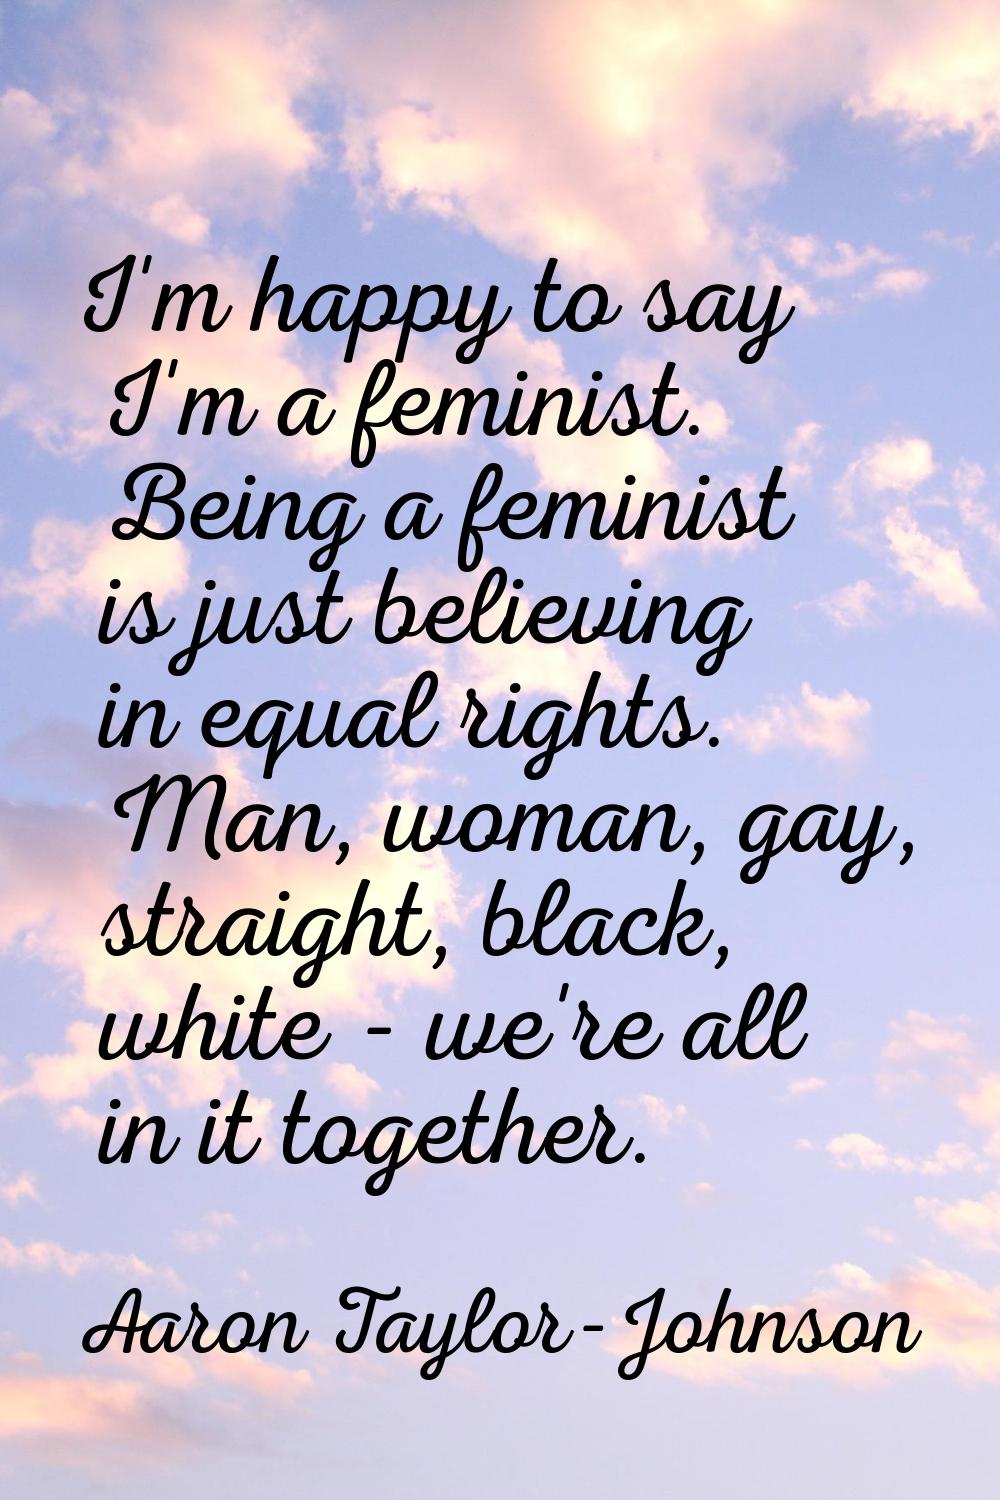 I'm happy to say I'm a feminist. Being a feminist is just believing in equal rights. Man, woman, ga